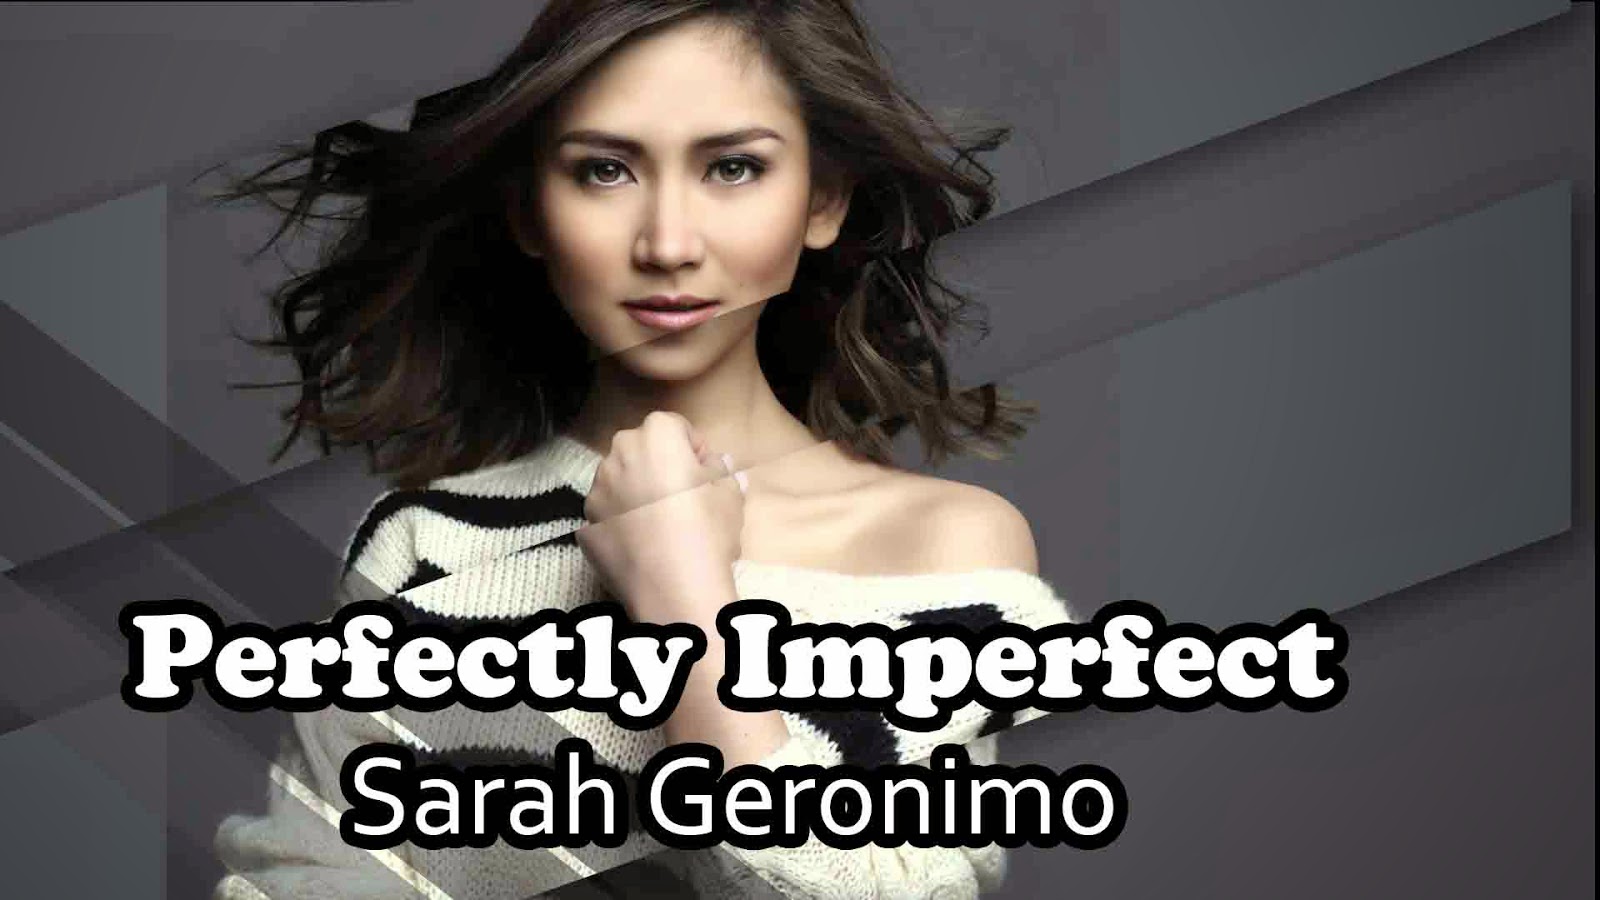 Here is the lyrics of 'Perfectly Imperfect' by Sarah Geronimo.